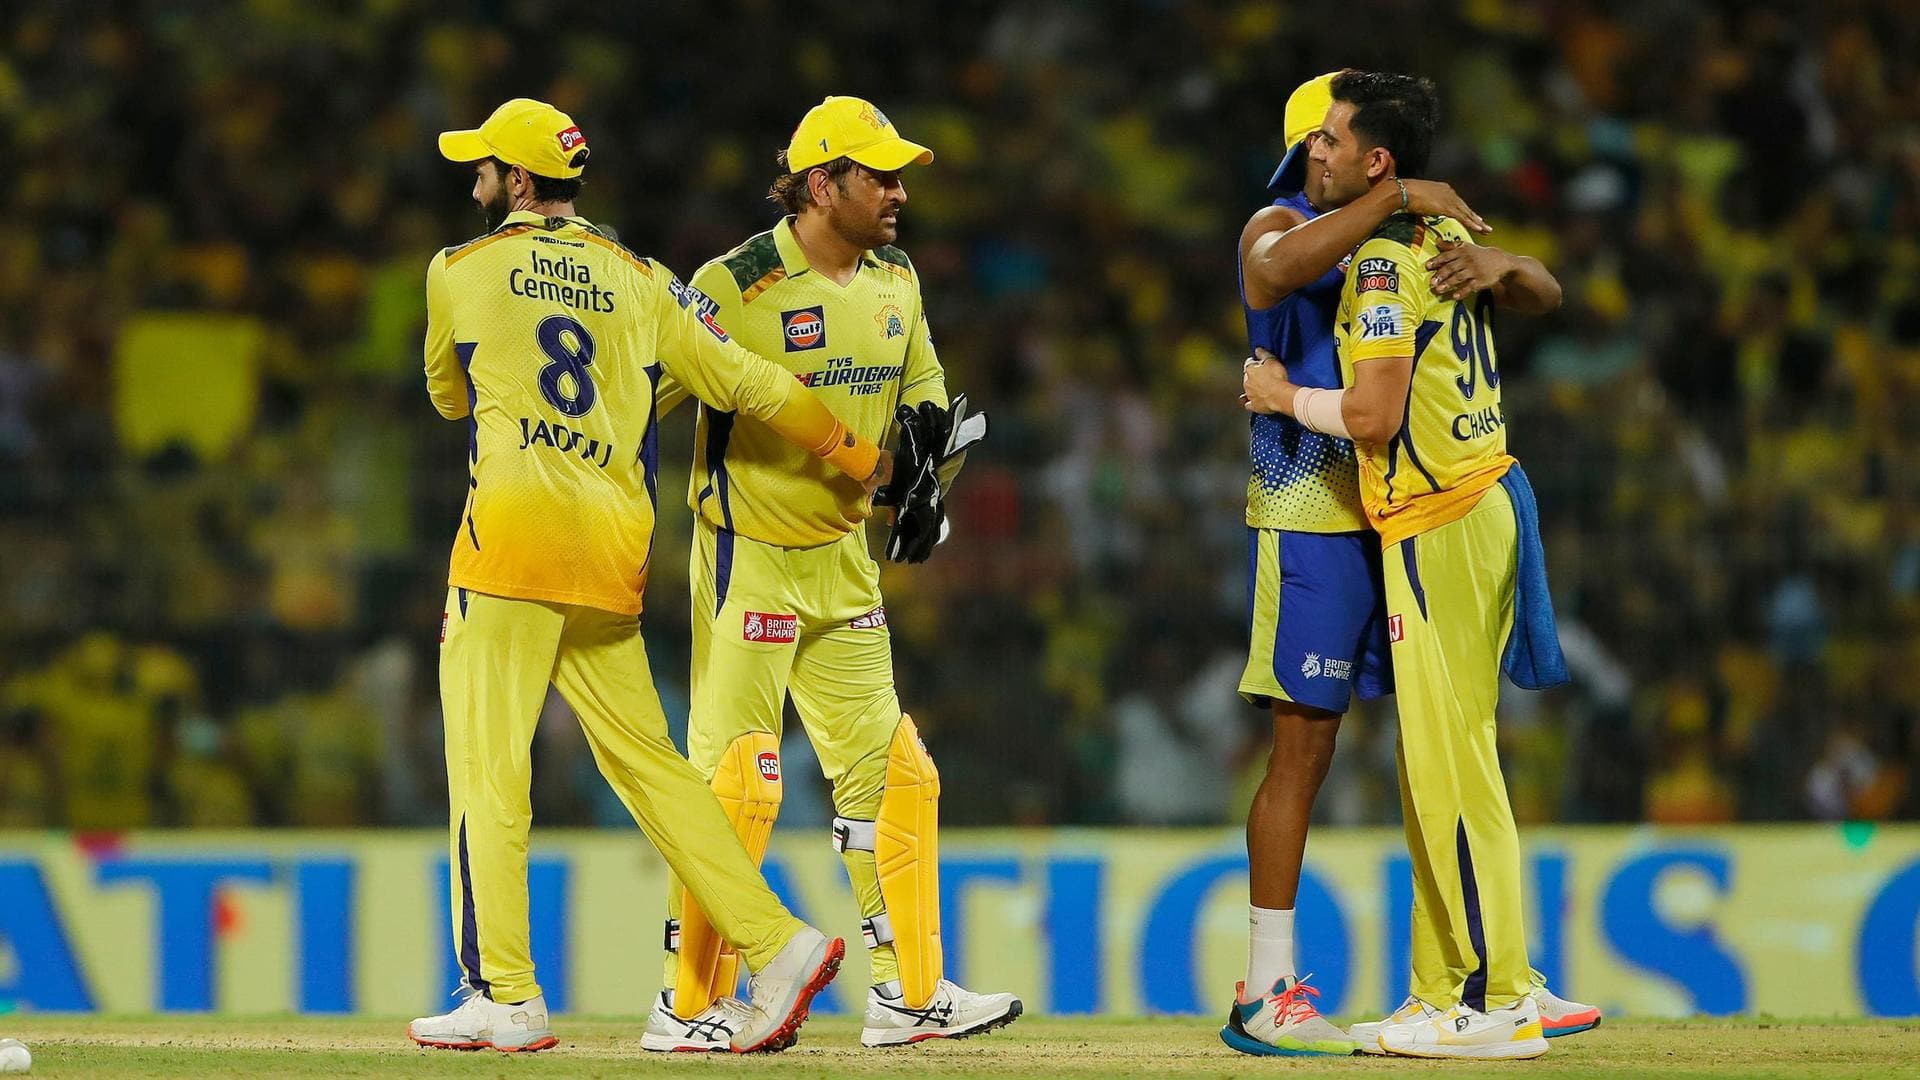 Chennai Super Kings: Decoding their stats in IPL finals